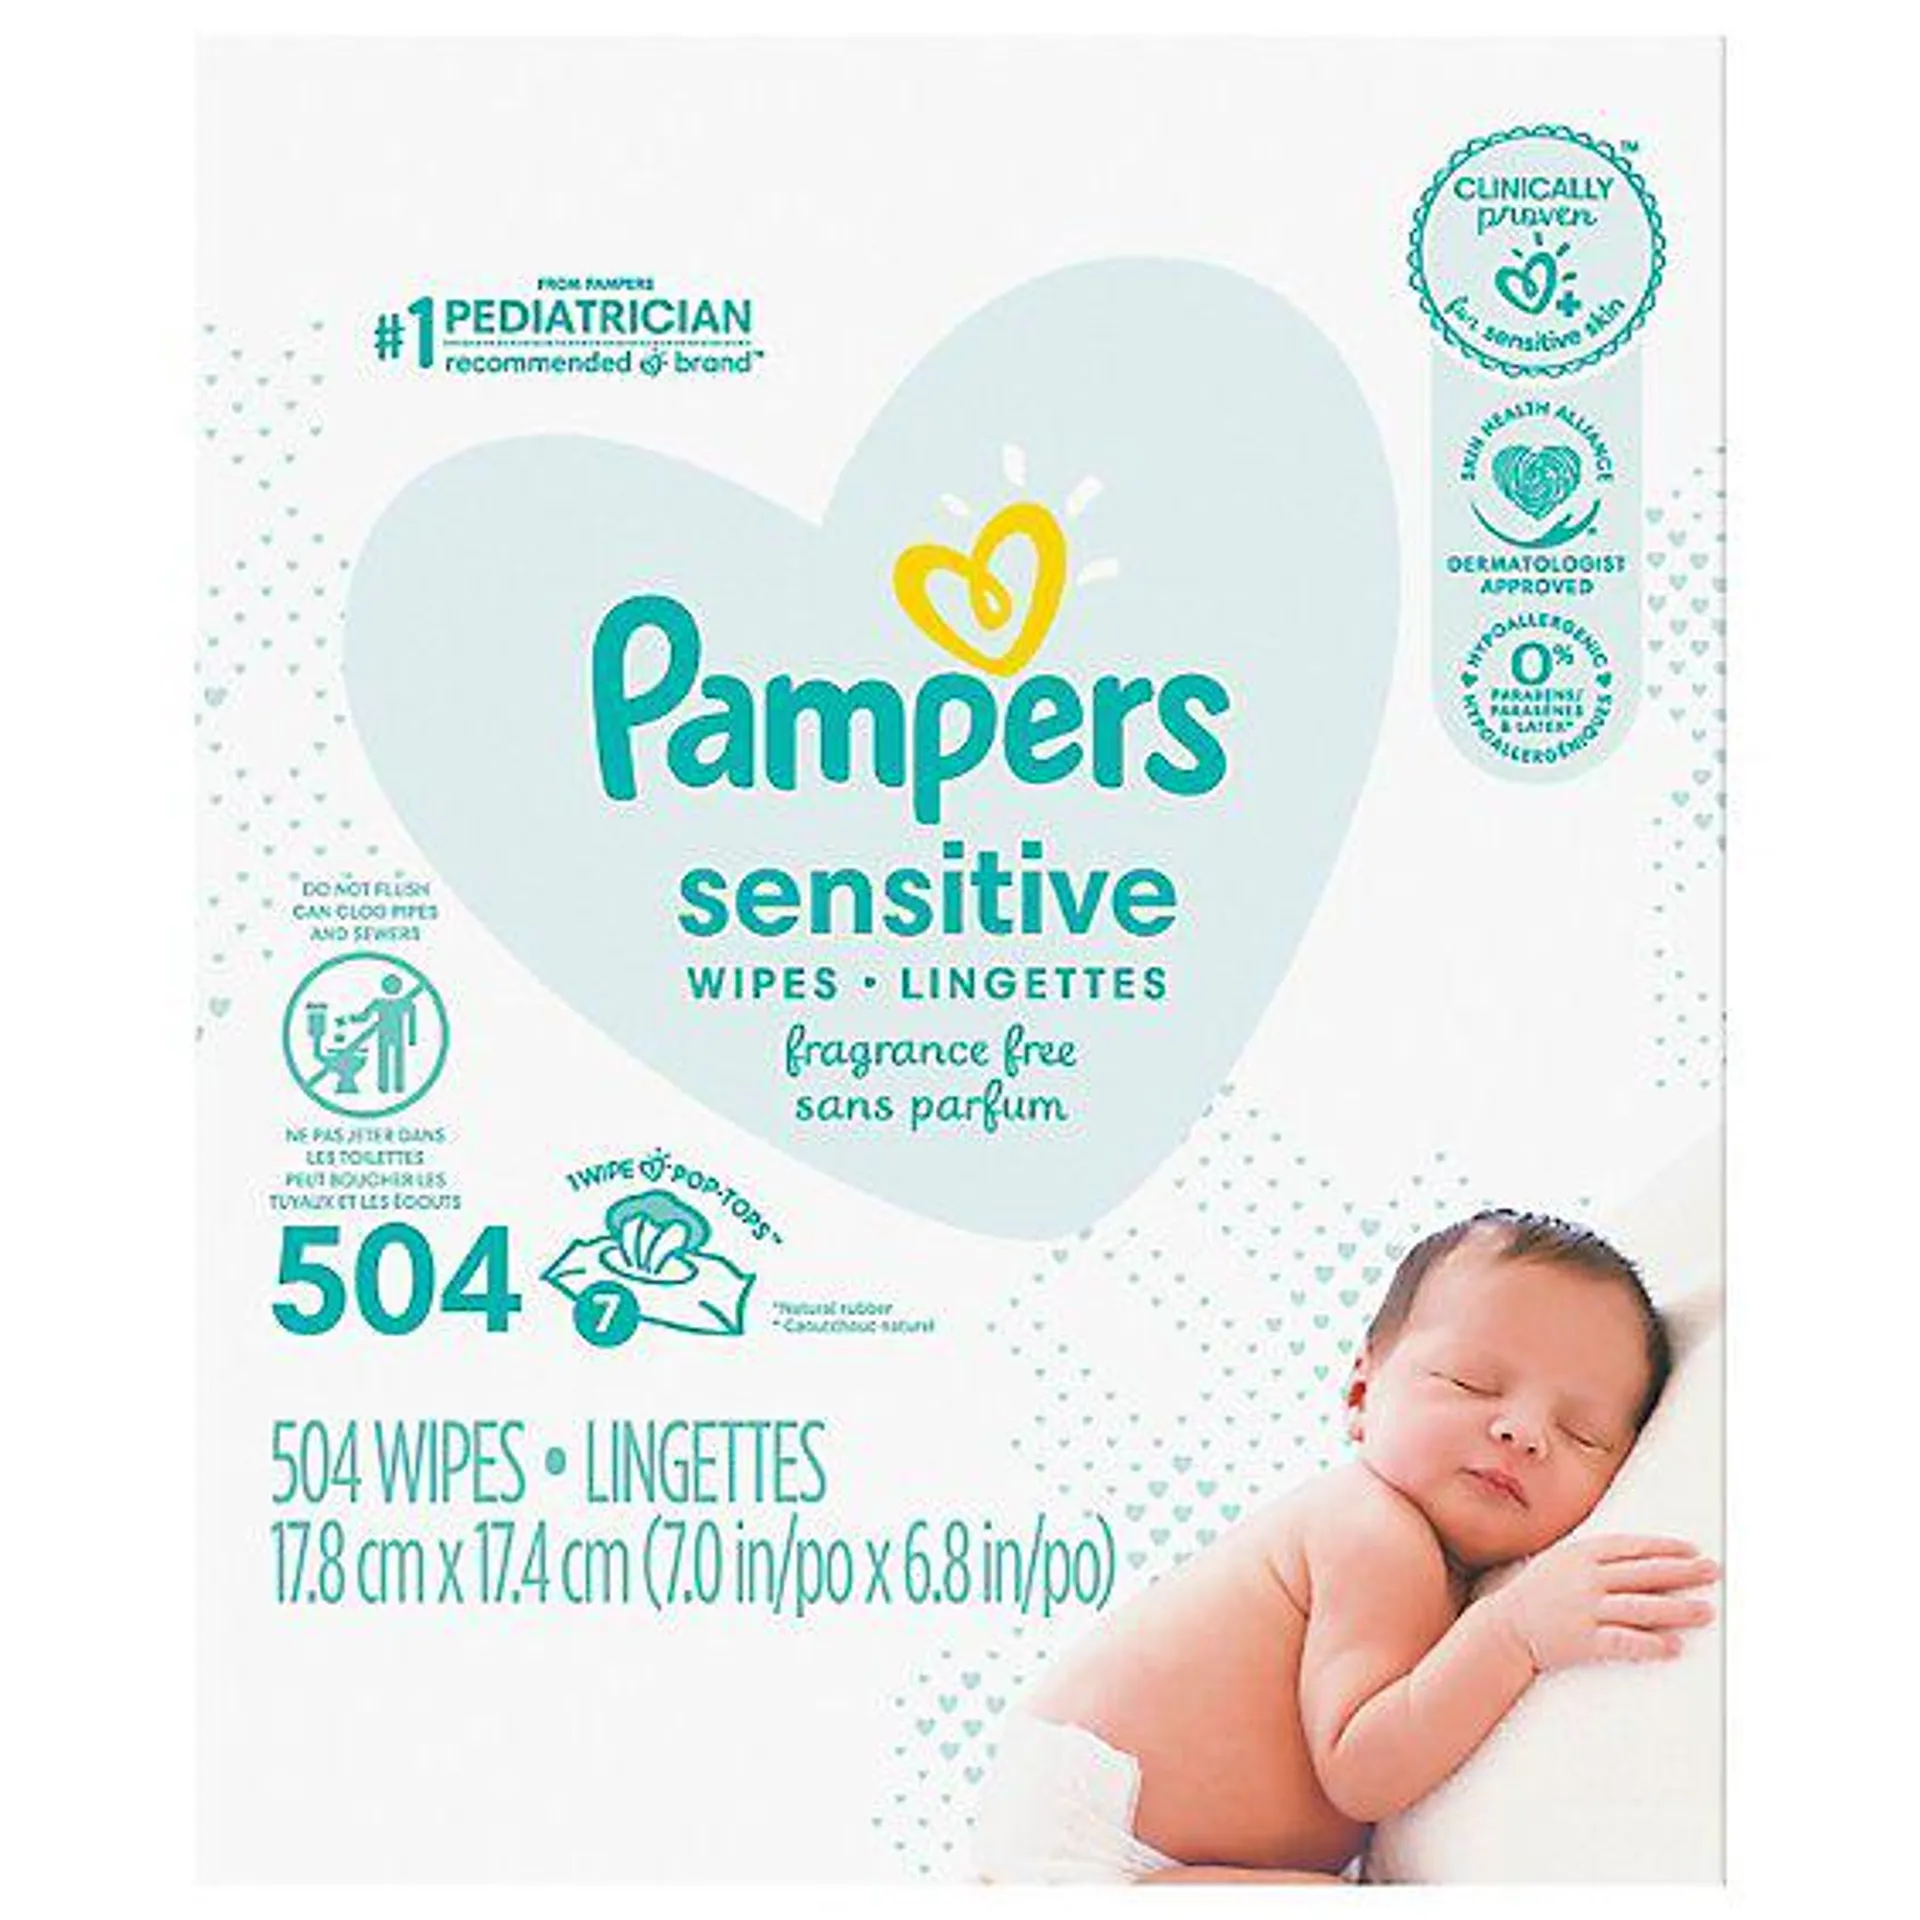 Pampers Baby Wipes Sensitive Perfume Free 7x Pop Top - 504 CT